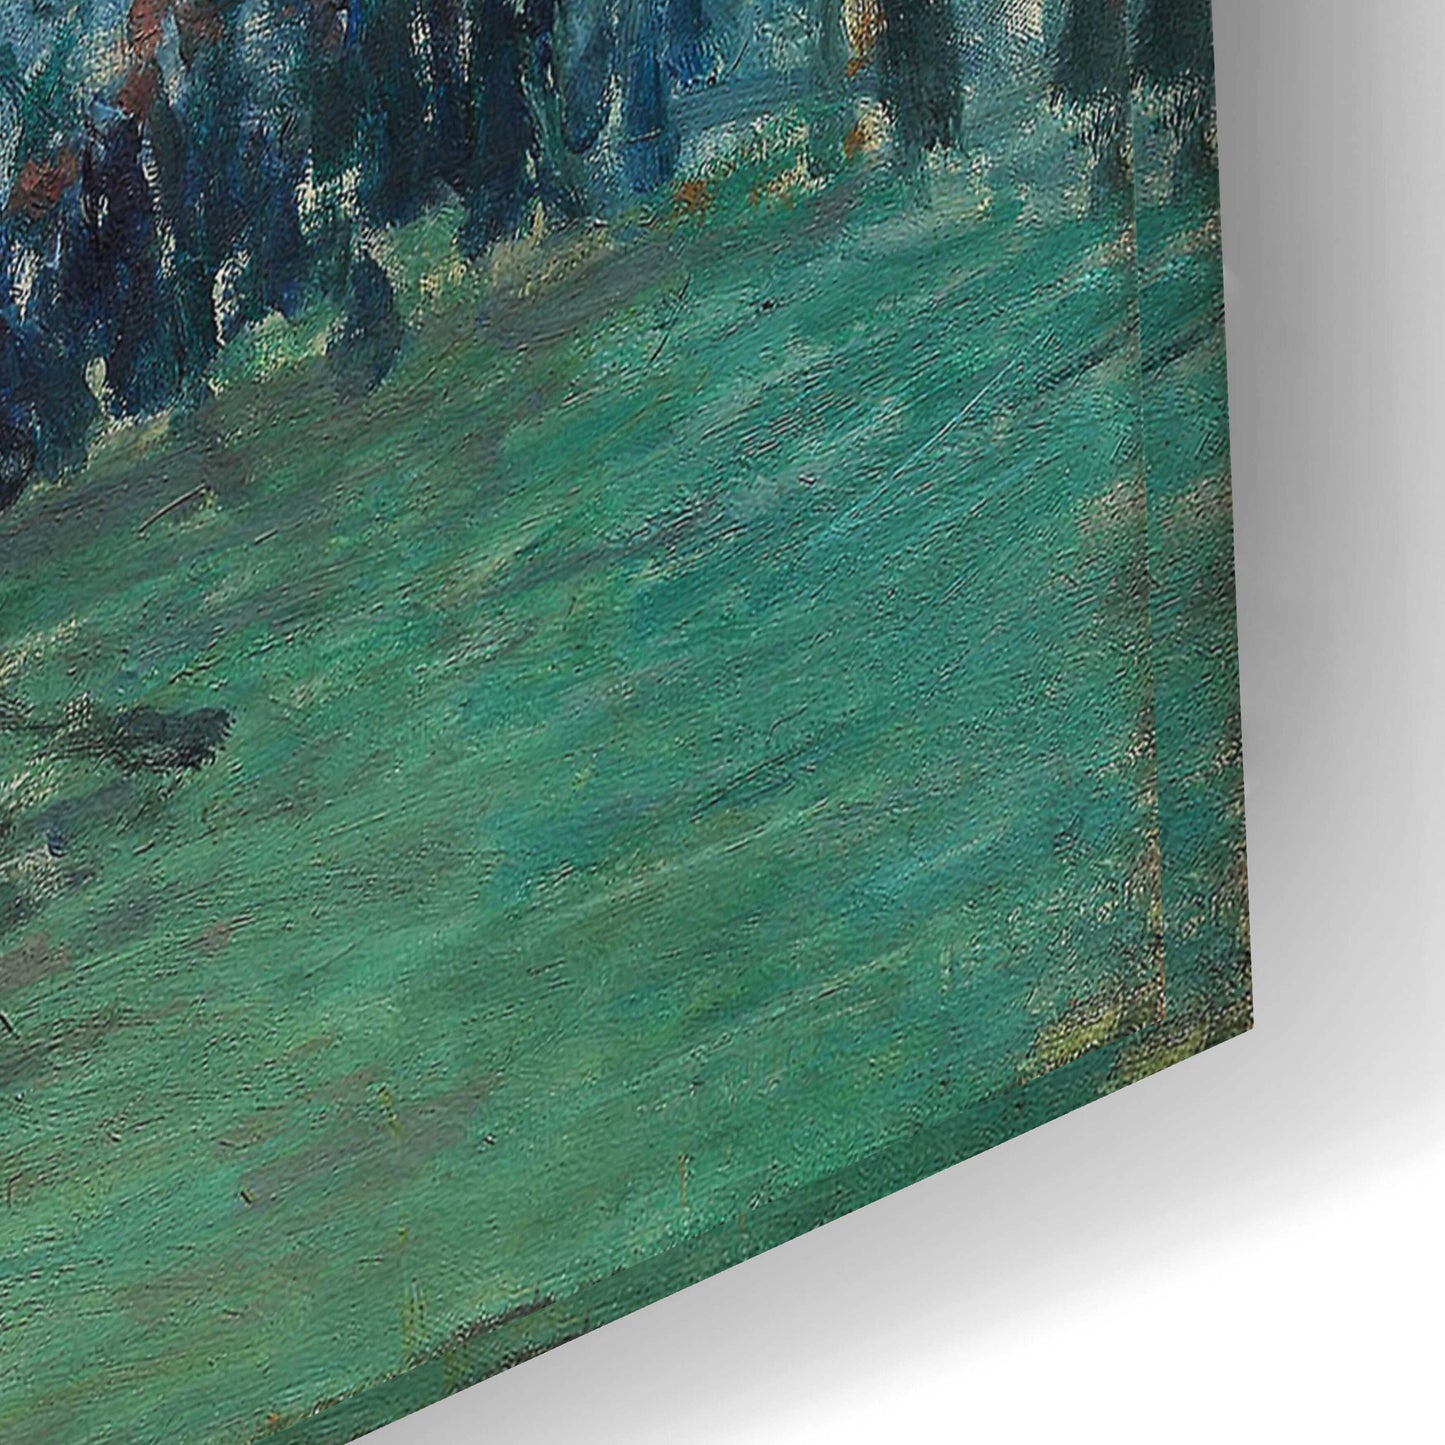 Epic Art 'Ariival Of The Normandy Train' by Claude Monet, Acrylic Glass Wall Art,24x16